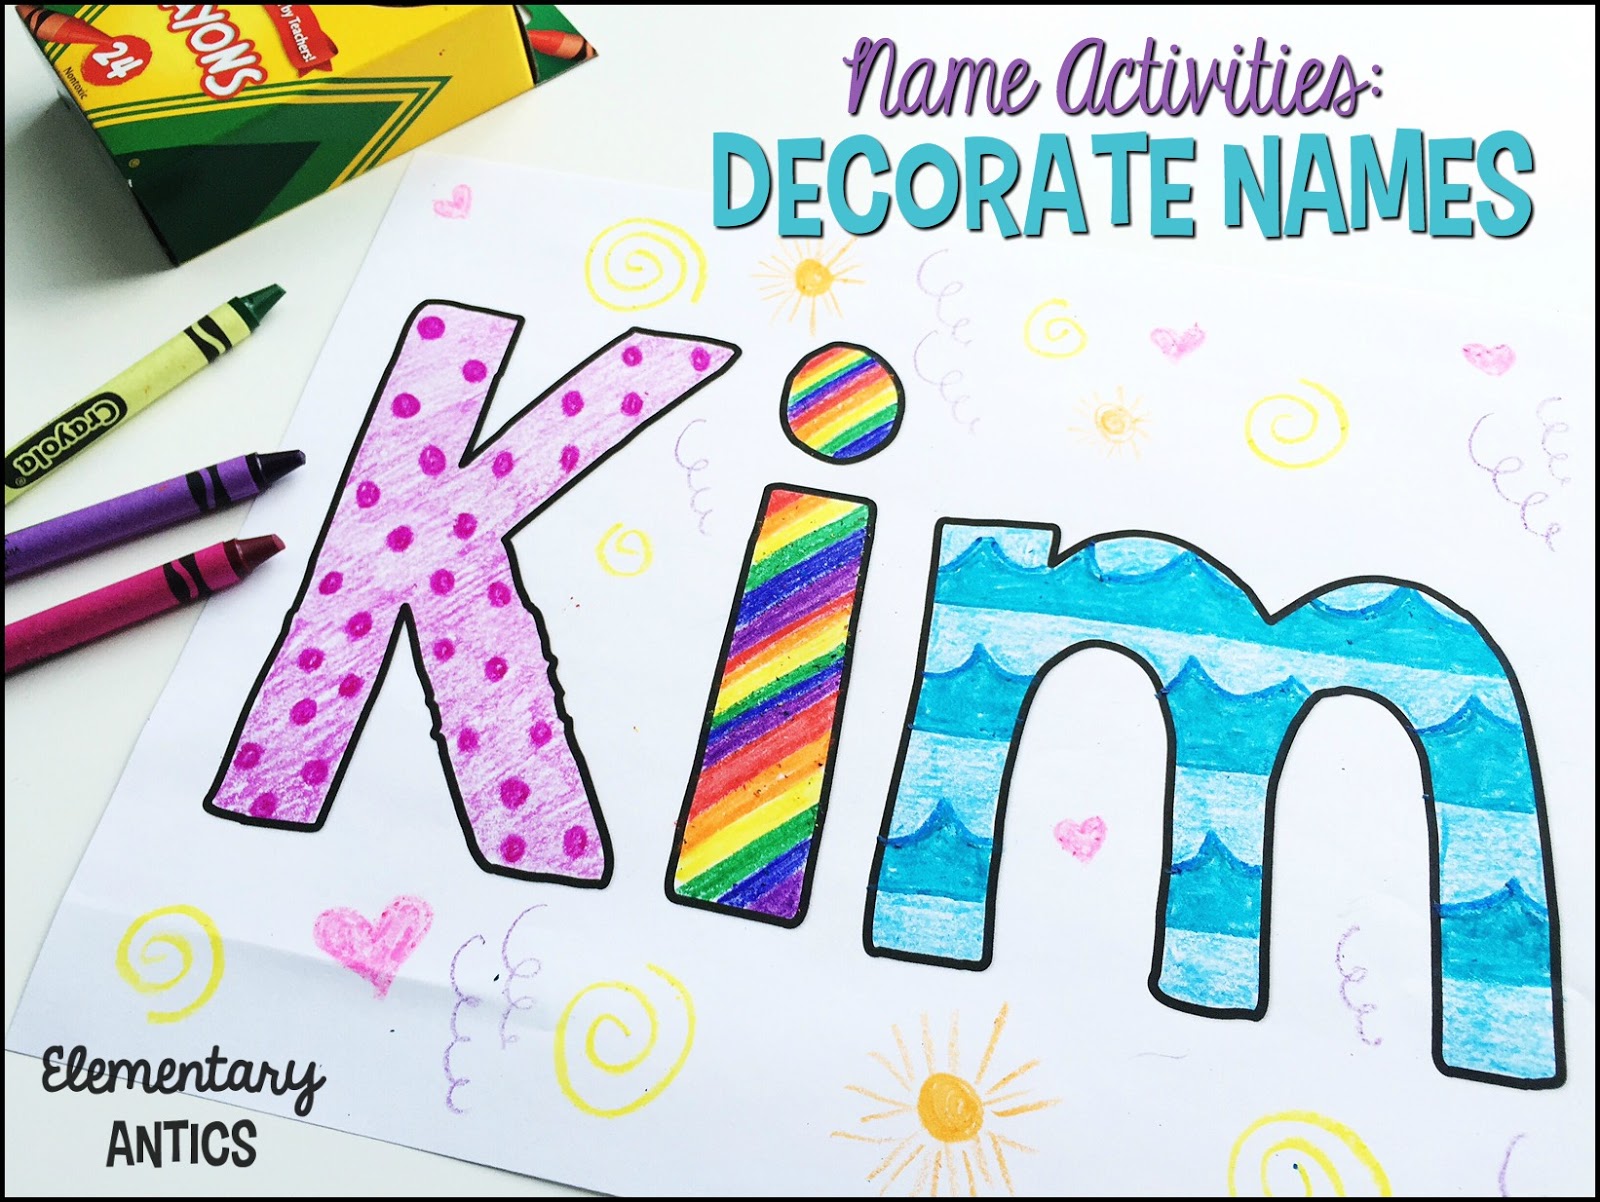 Elementary Antics: Name Activities for Back to School